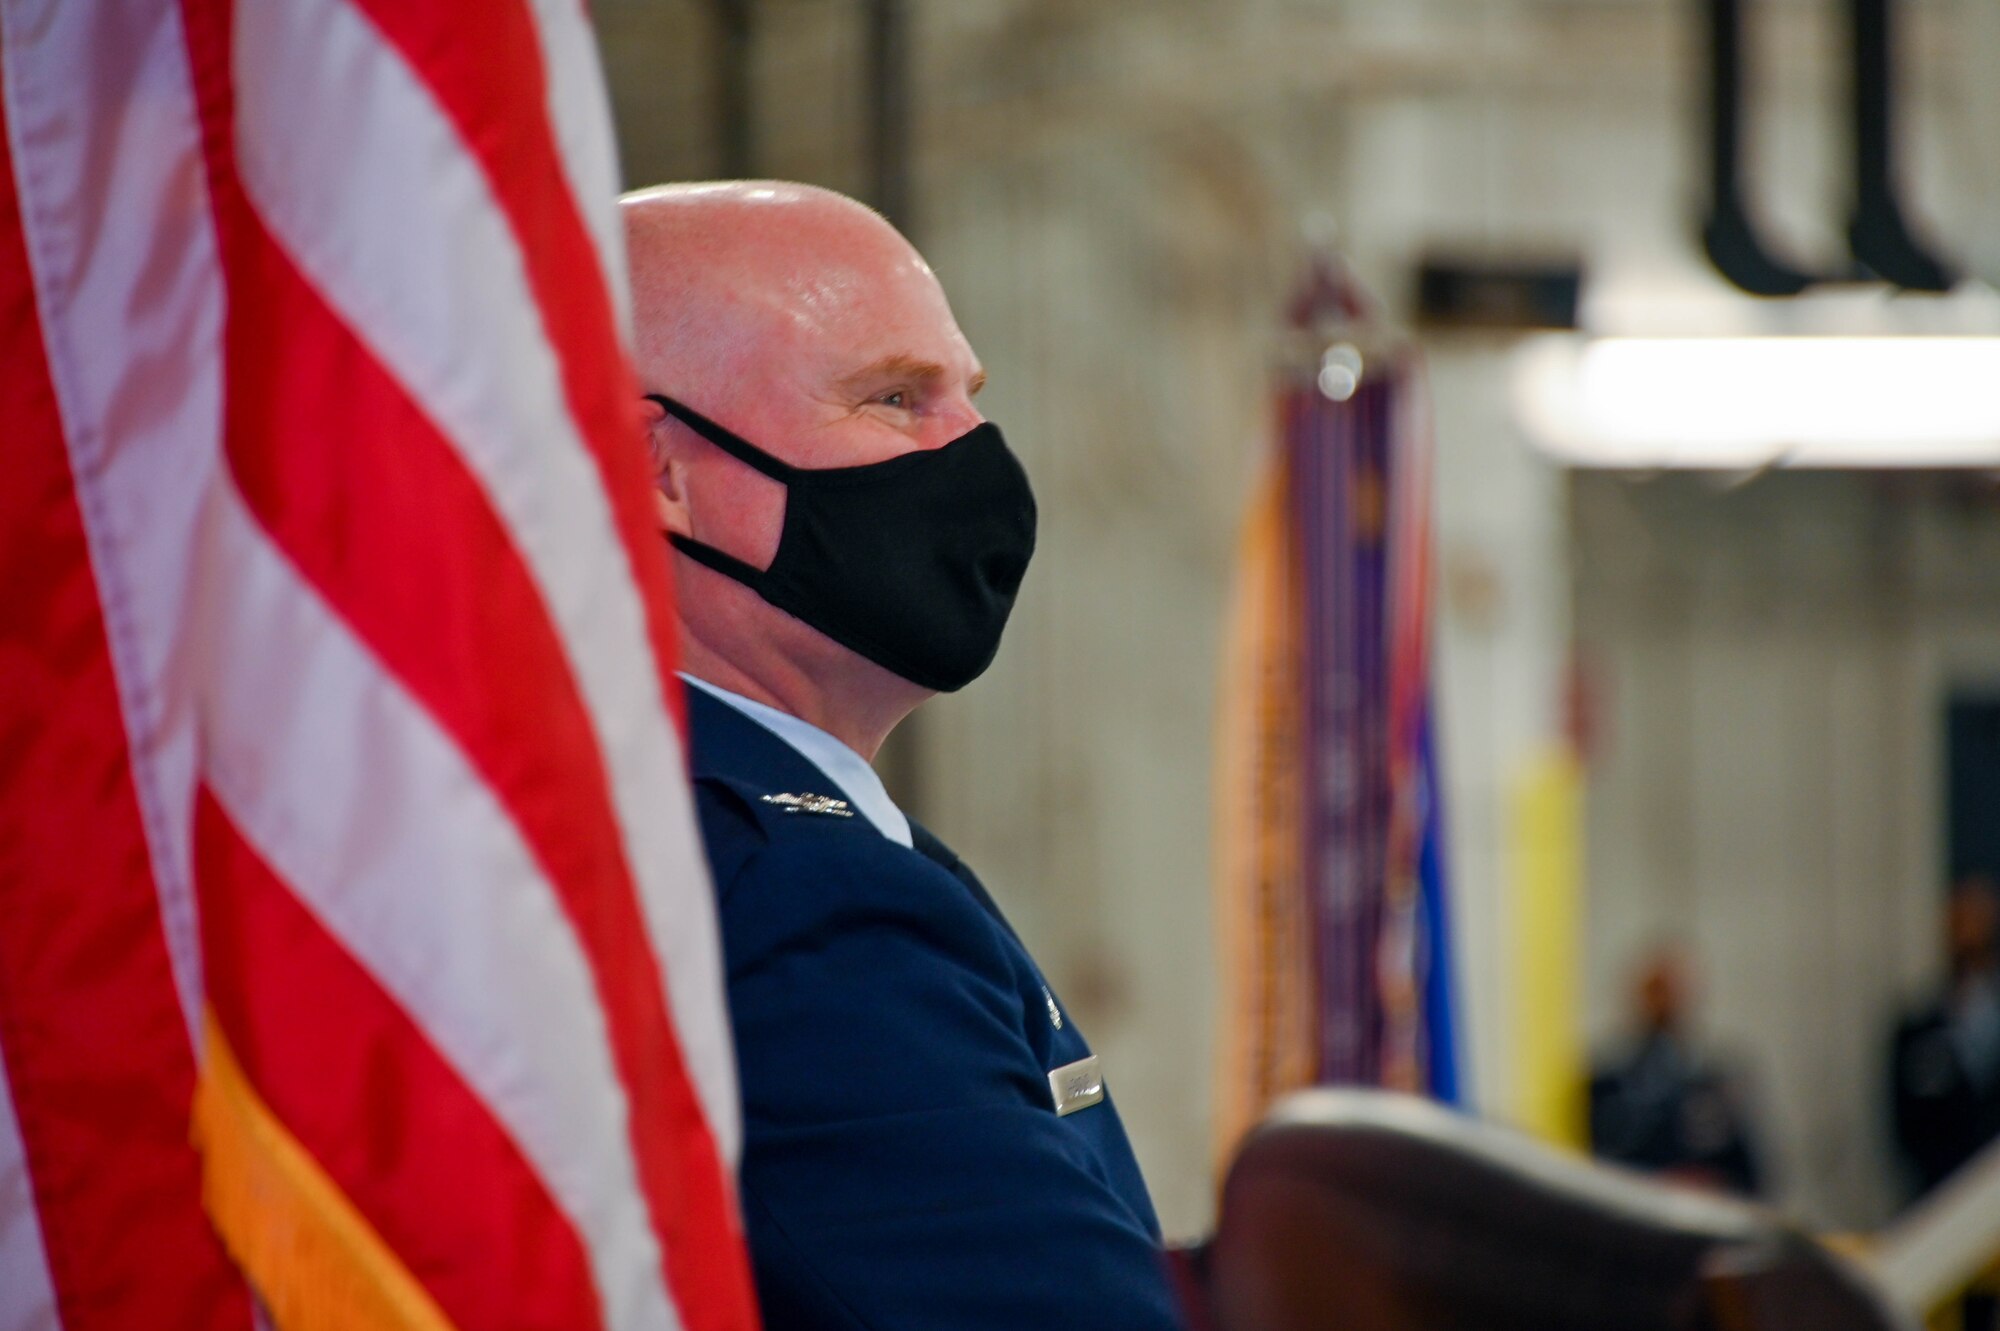 Col. Miles Heaslip, 507th Air Refueling Wing commander, listens to a speech during the 507th ARW change of command ceremony Nov. 8, 2020, at Tinker Air Force Base, Oklahoma. (U.S. Air Force photo by Senior Airman Mary Begy)